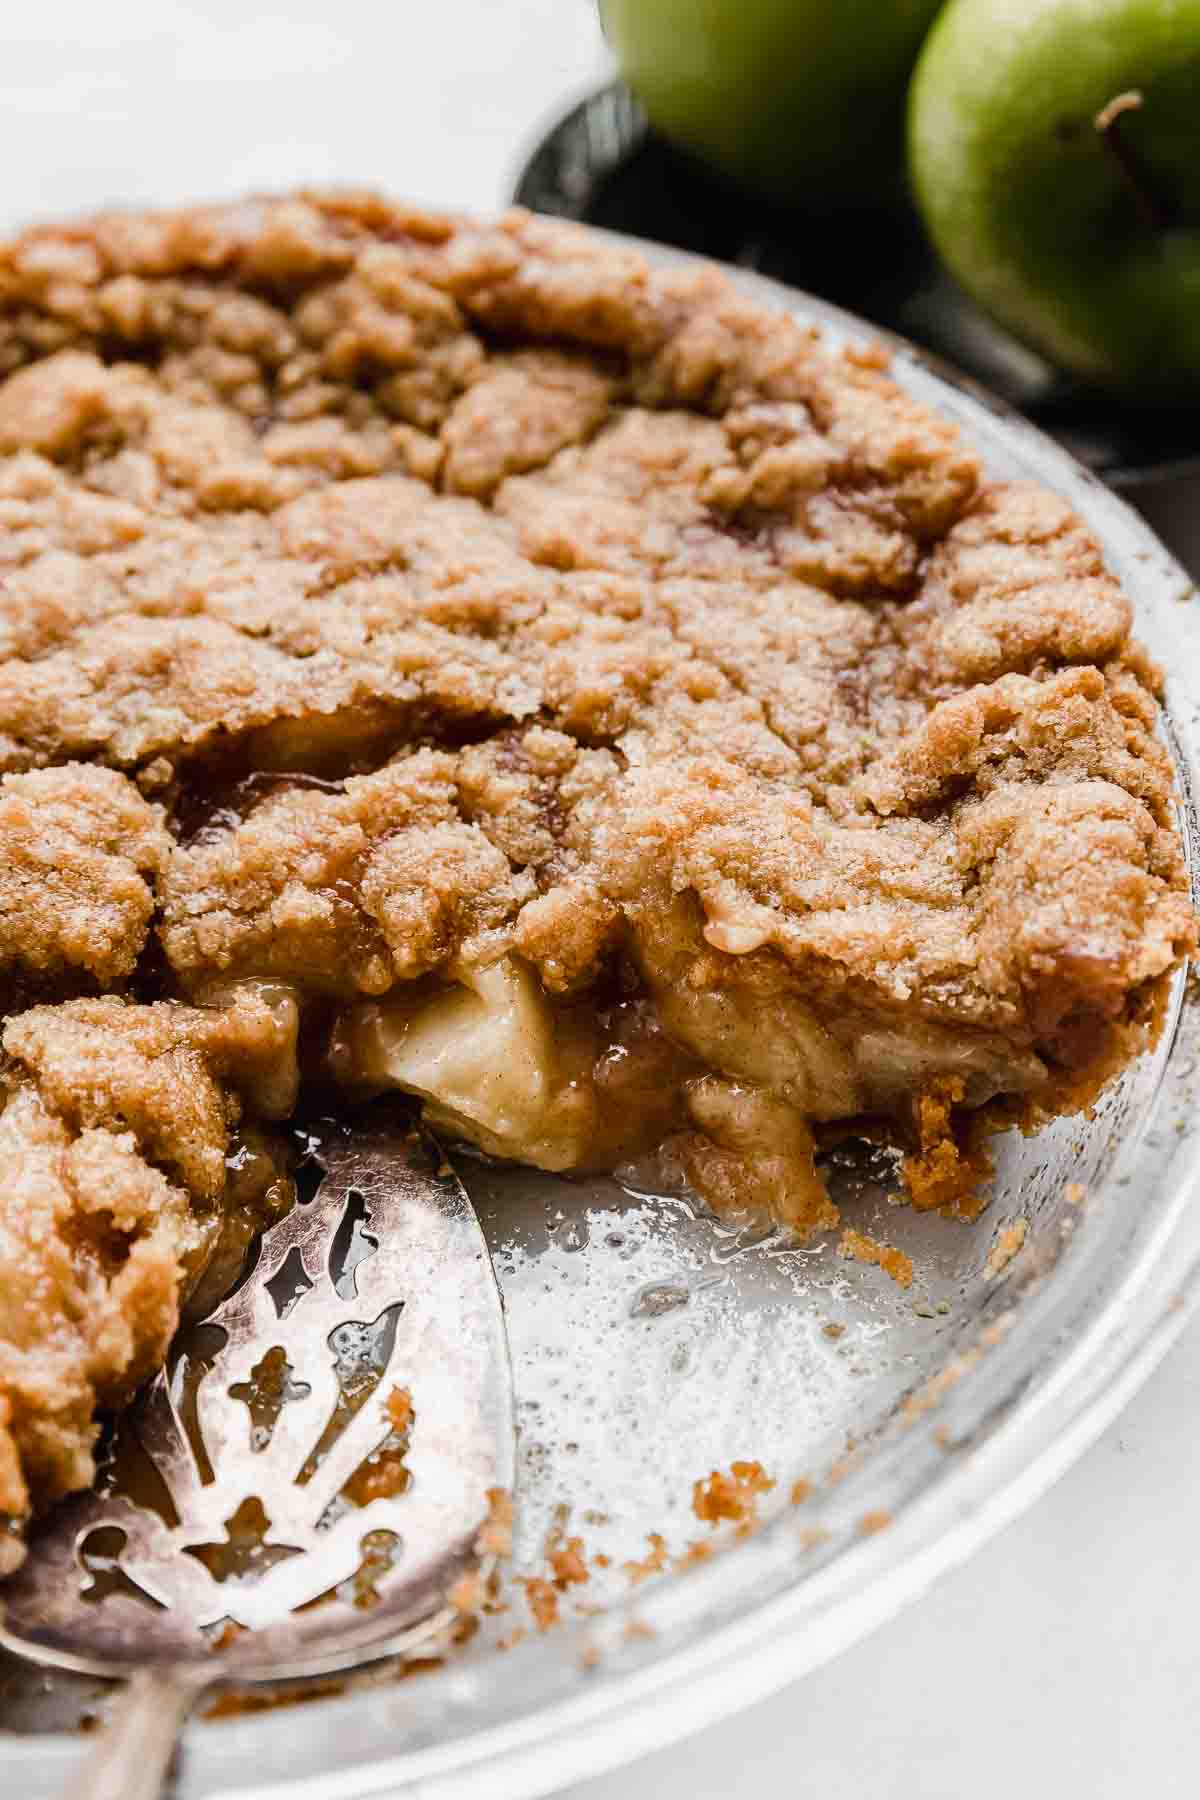 An Apple Pie with Graham Cracker Crust sliced, on a white background.